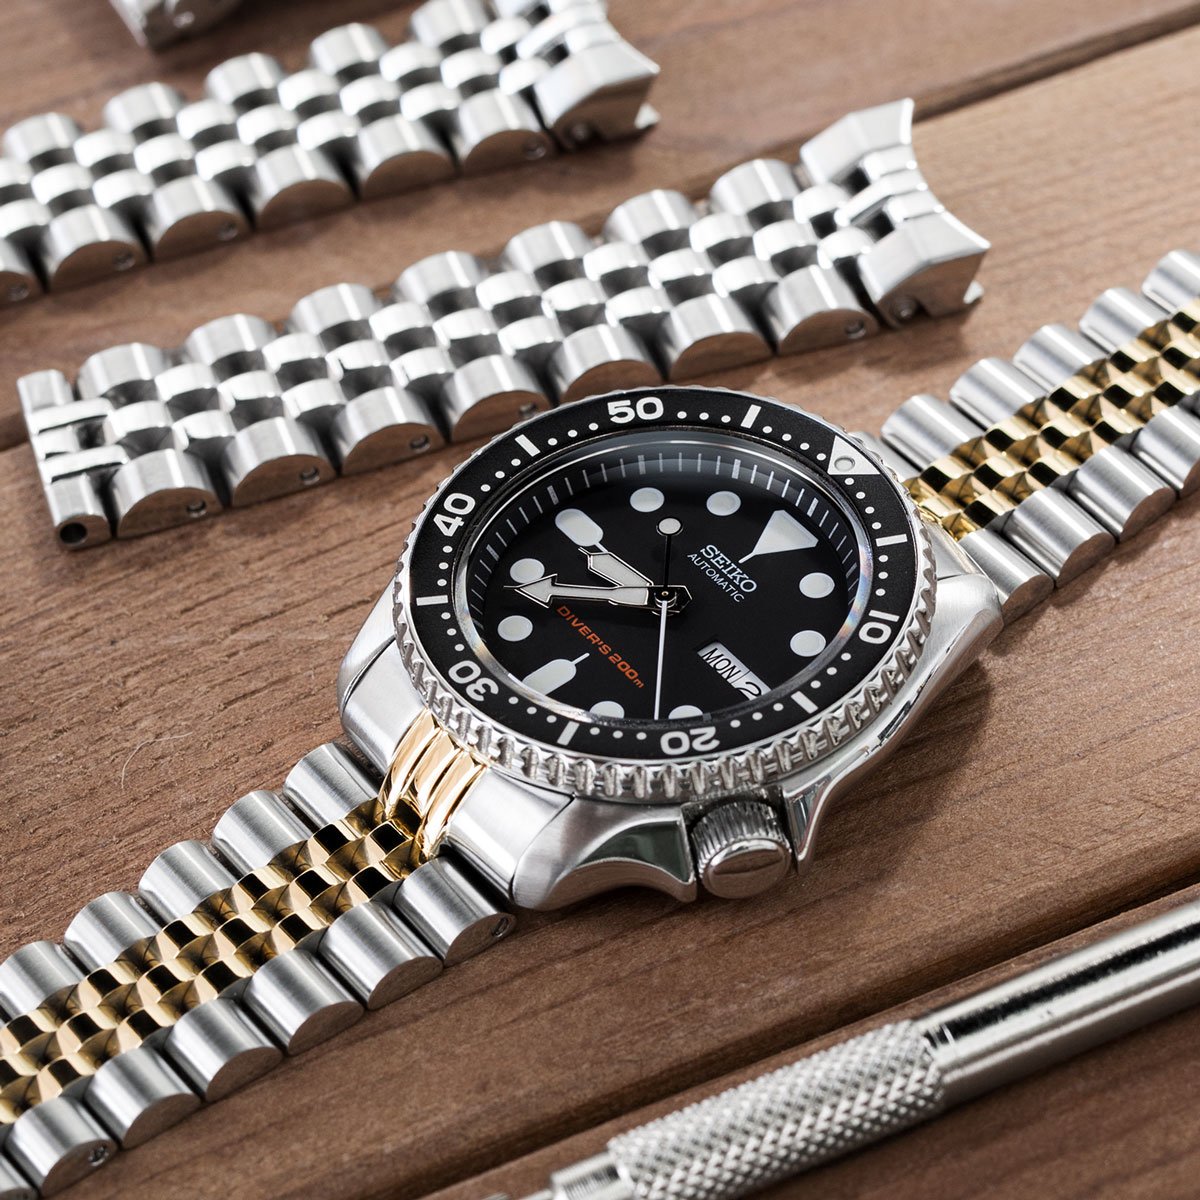 Seiko Scuba SKX009 Japan with OEM jubilee for $486 for sale from a Private  Seller on Chrono24